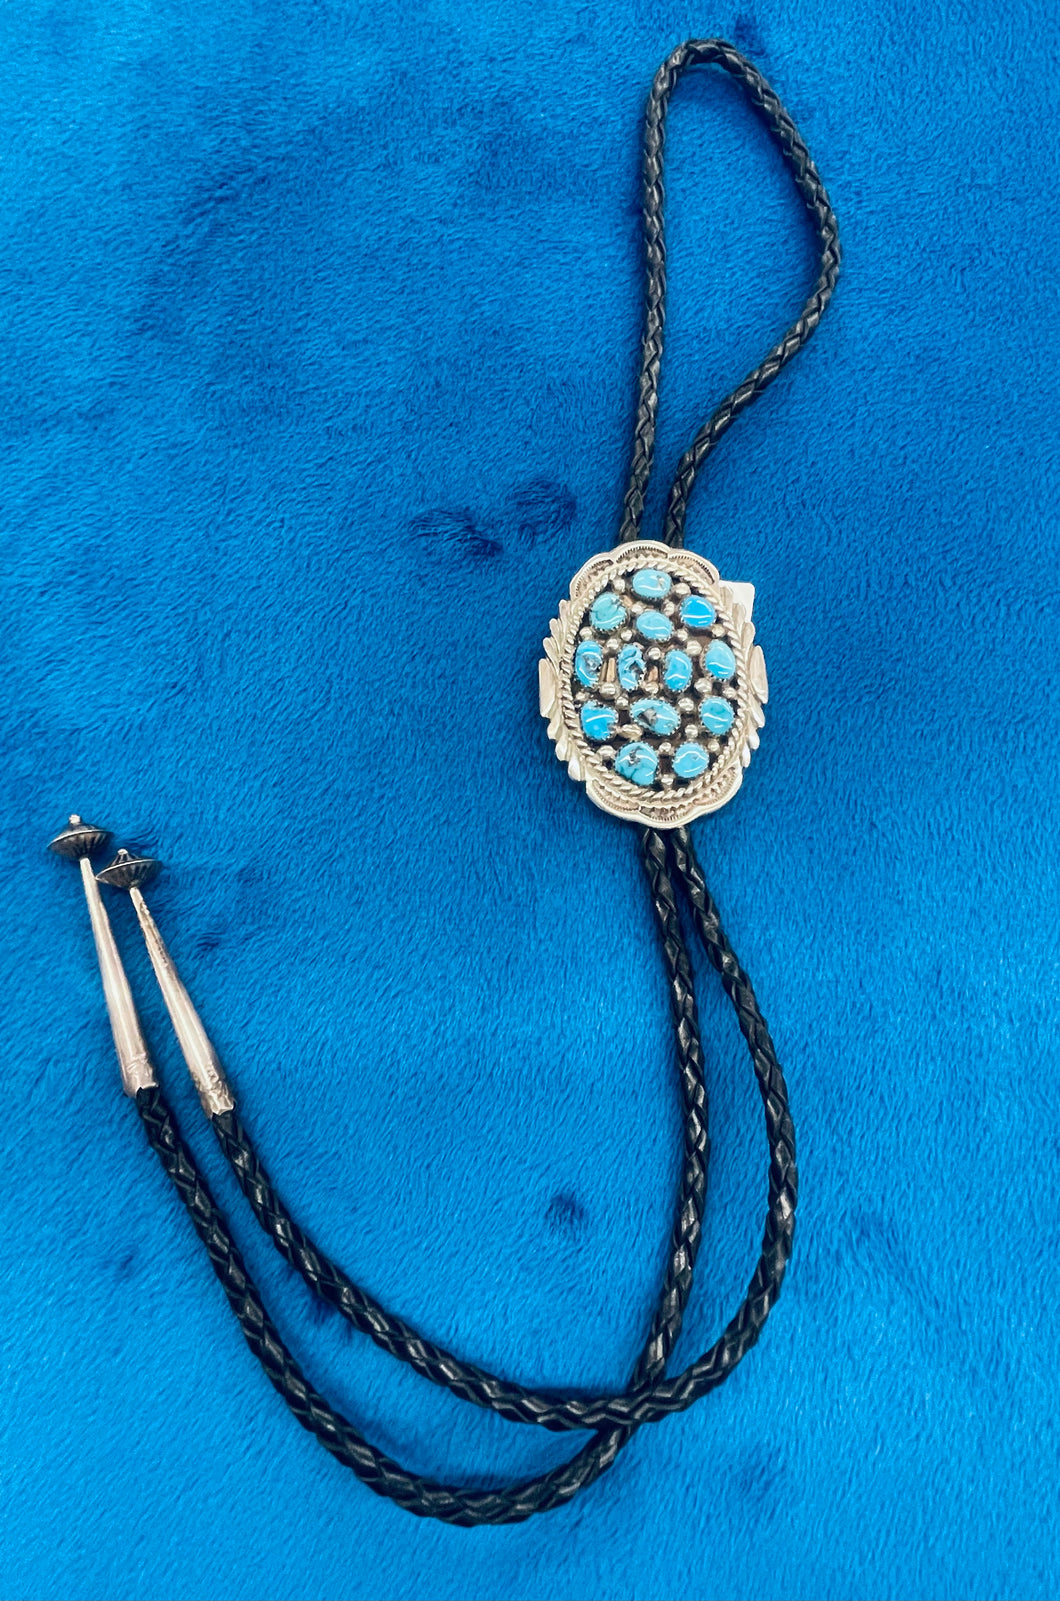 Turquoise and Silver Bolo Tie with Silver Tips